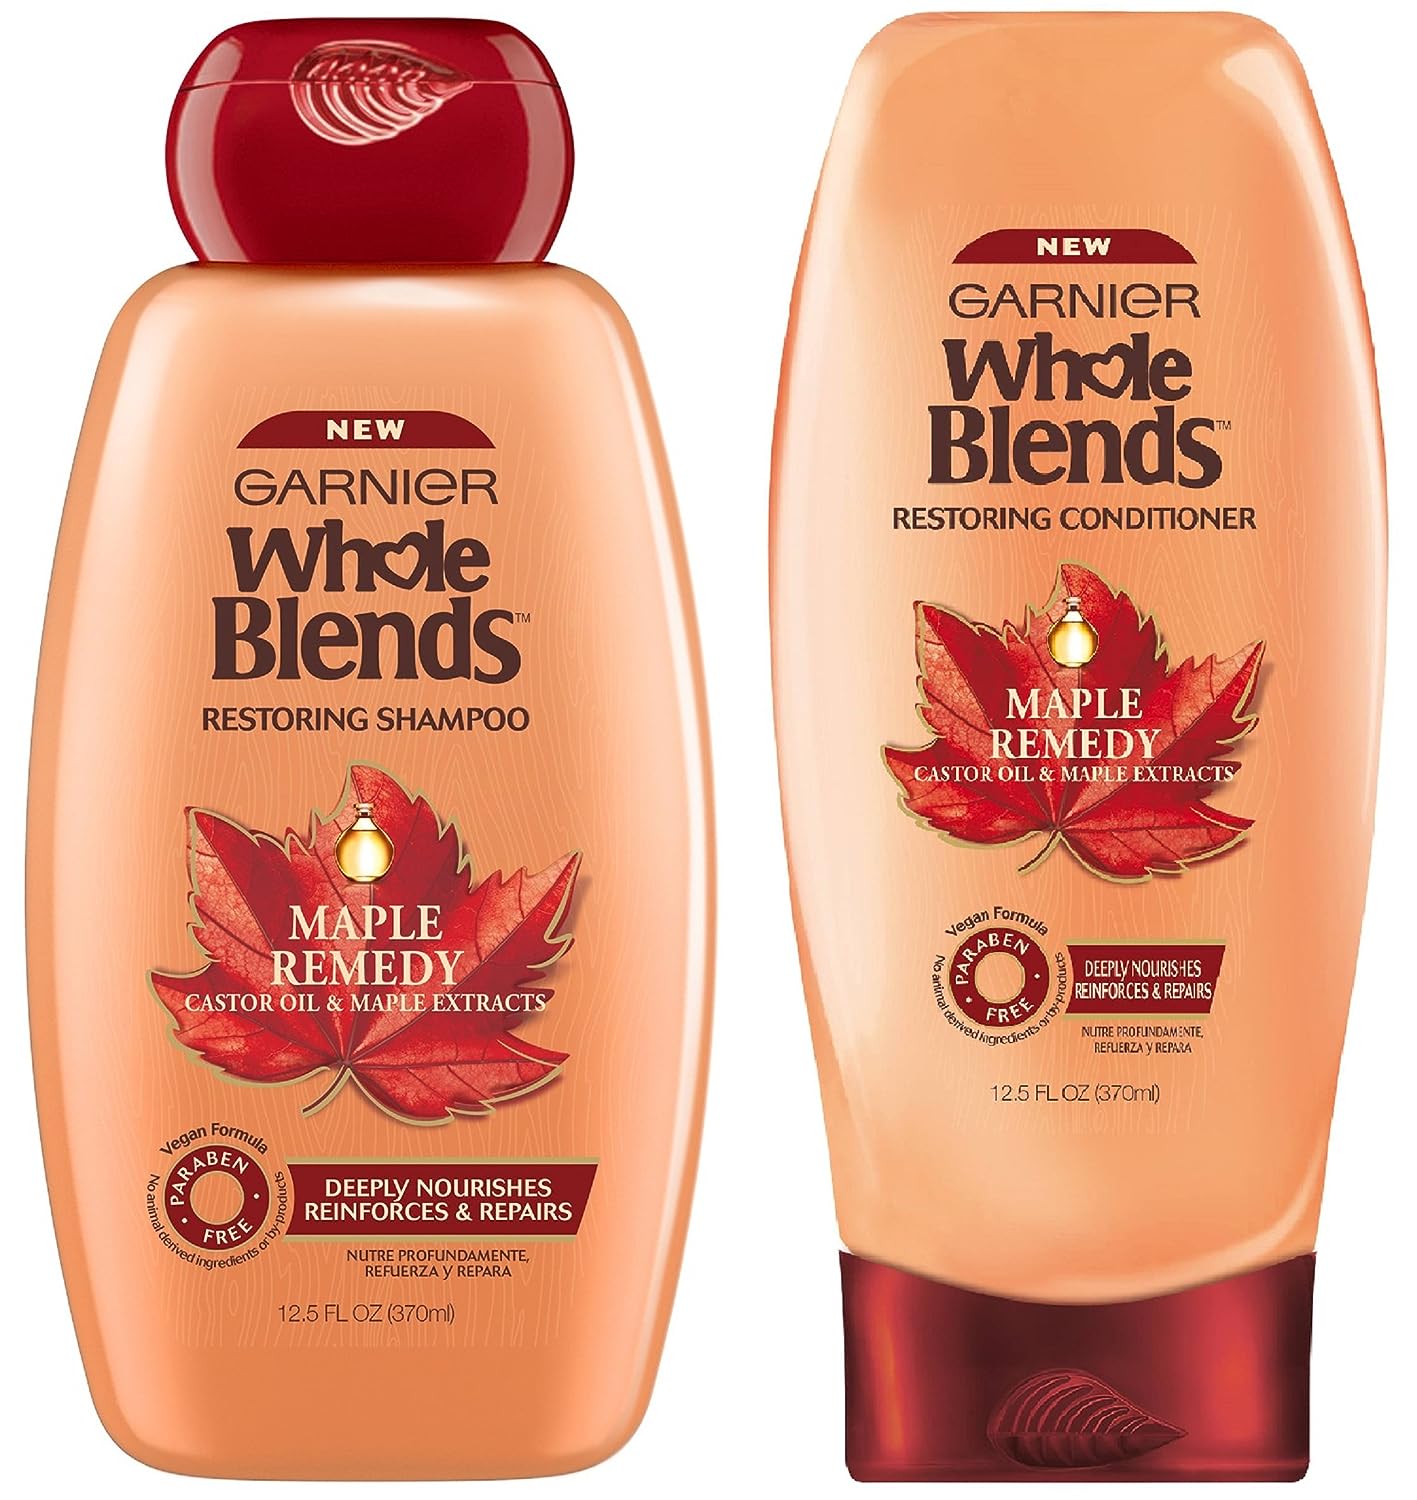 Whole Blends